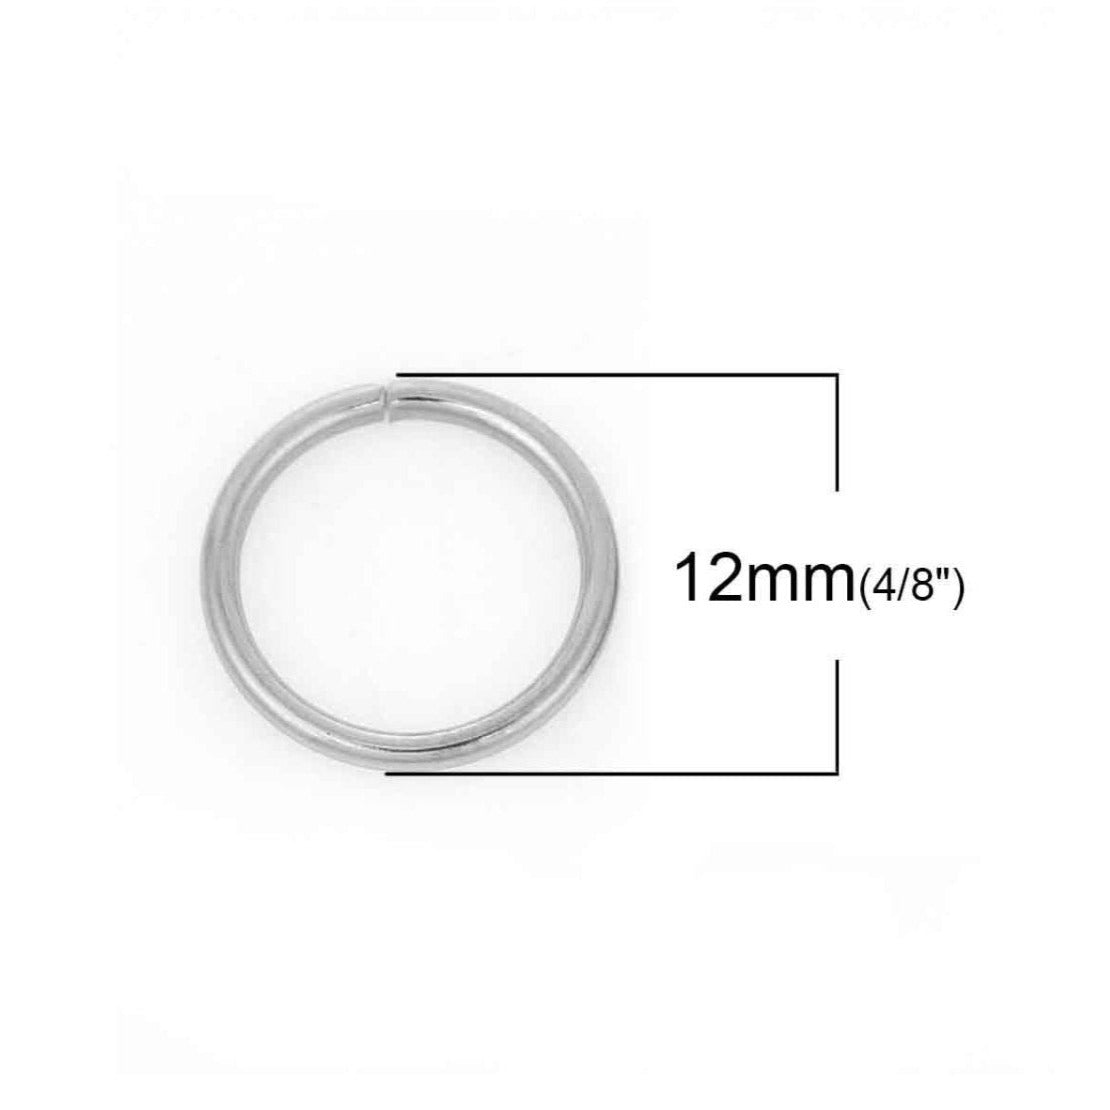 Bulk Sterling Silver Open Jump Rings 12mm 14mm 16mm With 1mm 